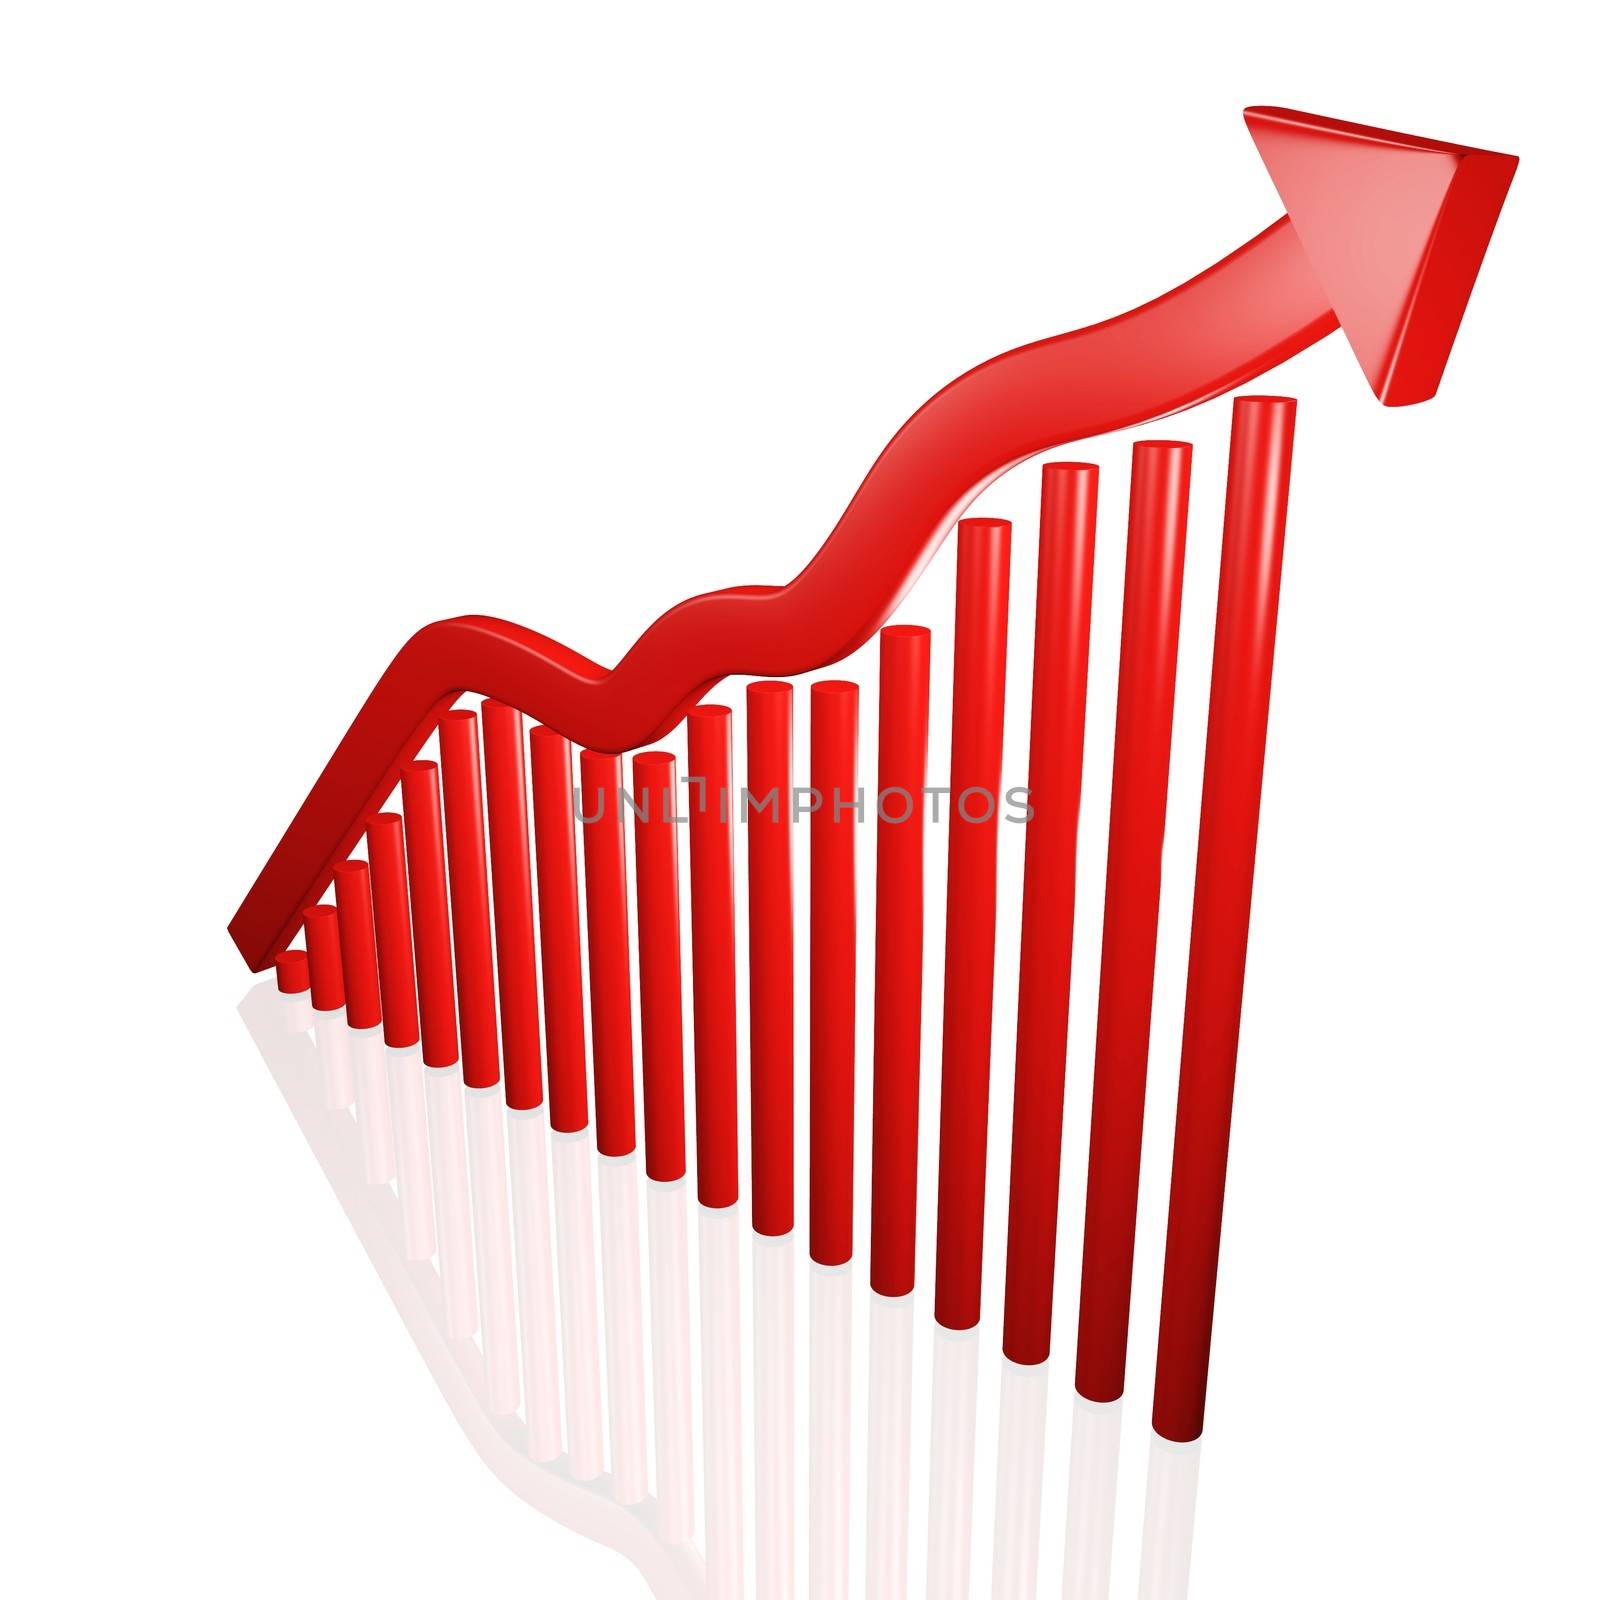 Market or financial growth illustrated in 3D with round growth bars and upward moving arrow
